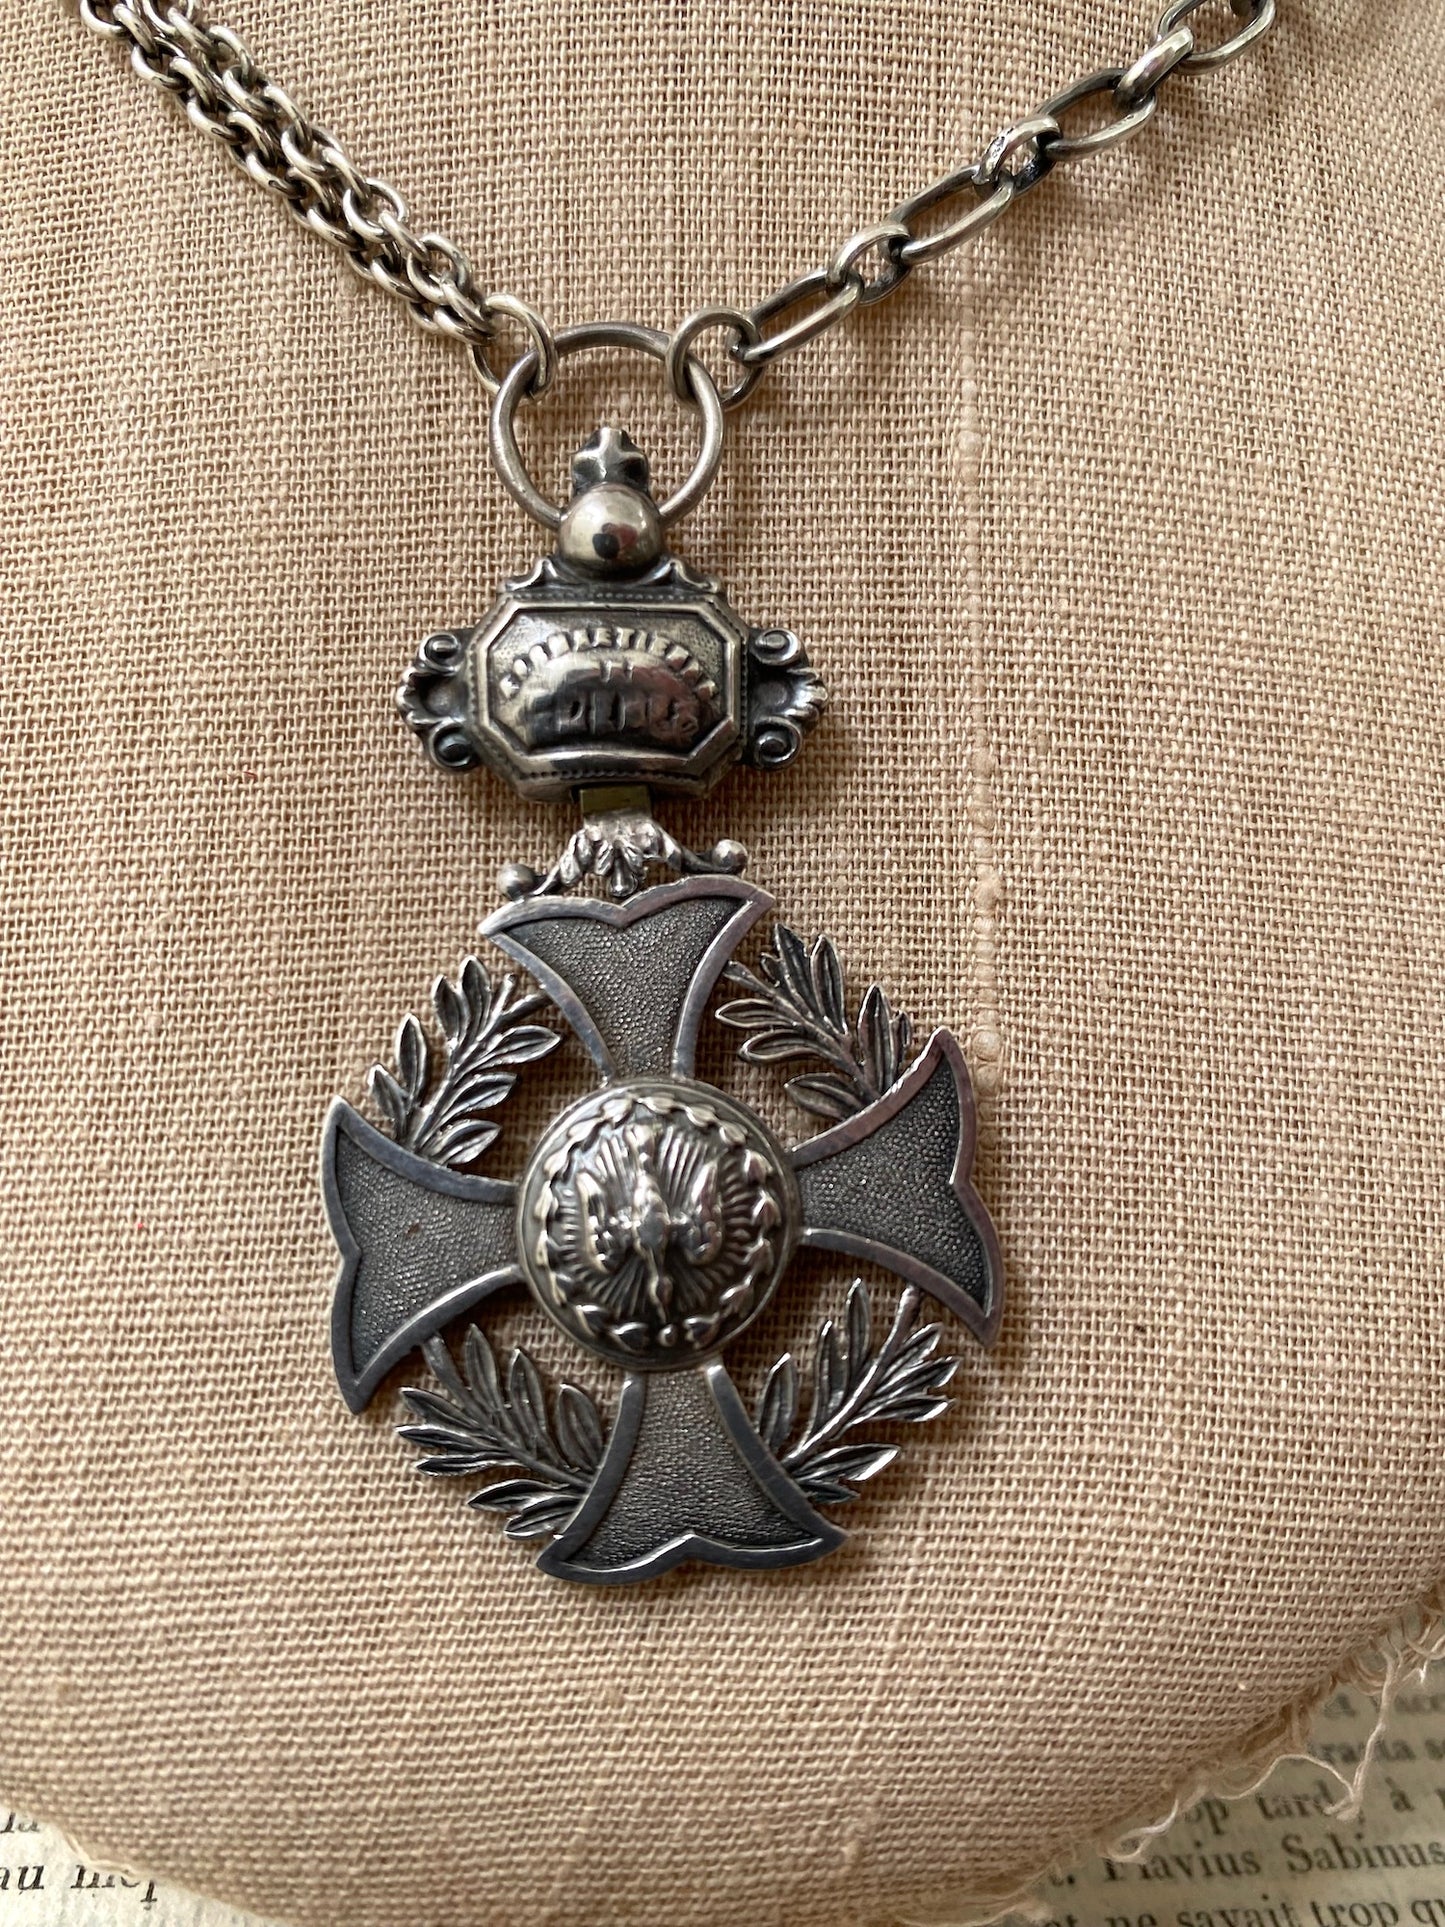 Antique French Silver Merit Award Medal Necklace